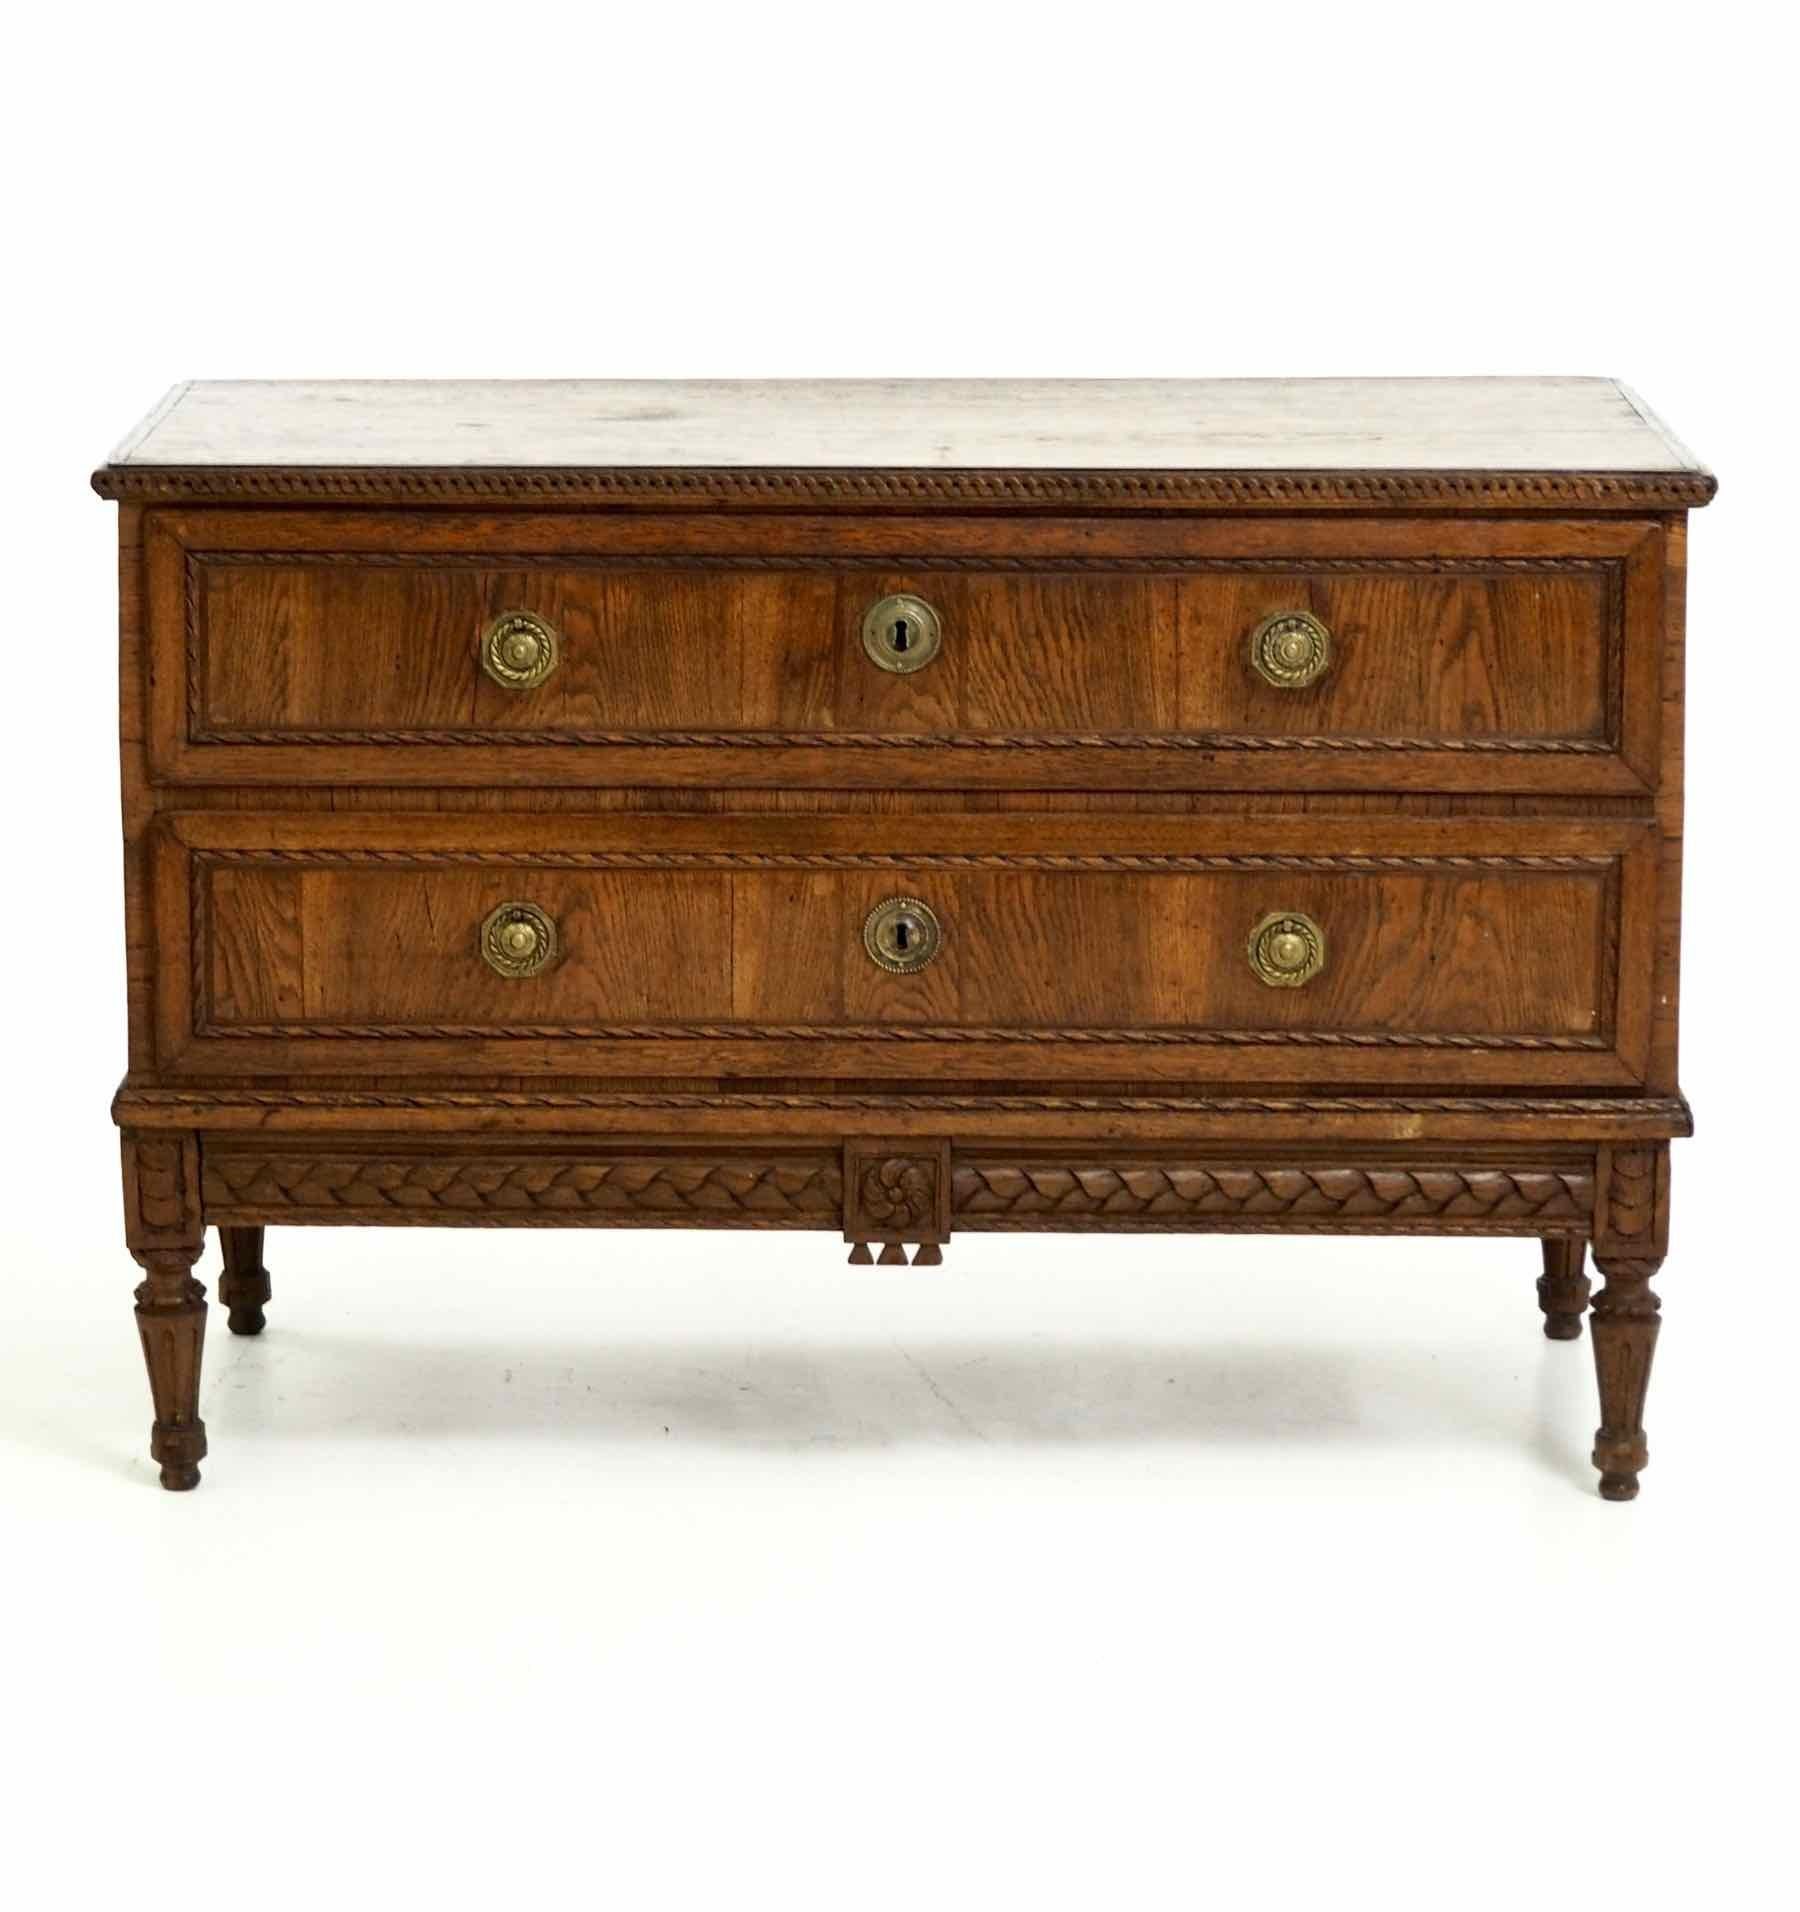 Stunning and rare Italian or French Louis Seize chest in fruitwood, with two drawers, richly carved. Original locks and patina, from the 1790s. 

 Measures: H. 84, W. 127, D. 63 cm
 H. 33, W. 50, D. 24.8 in.